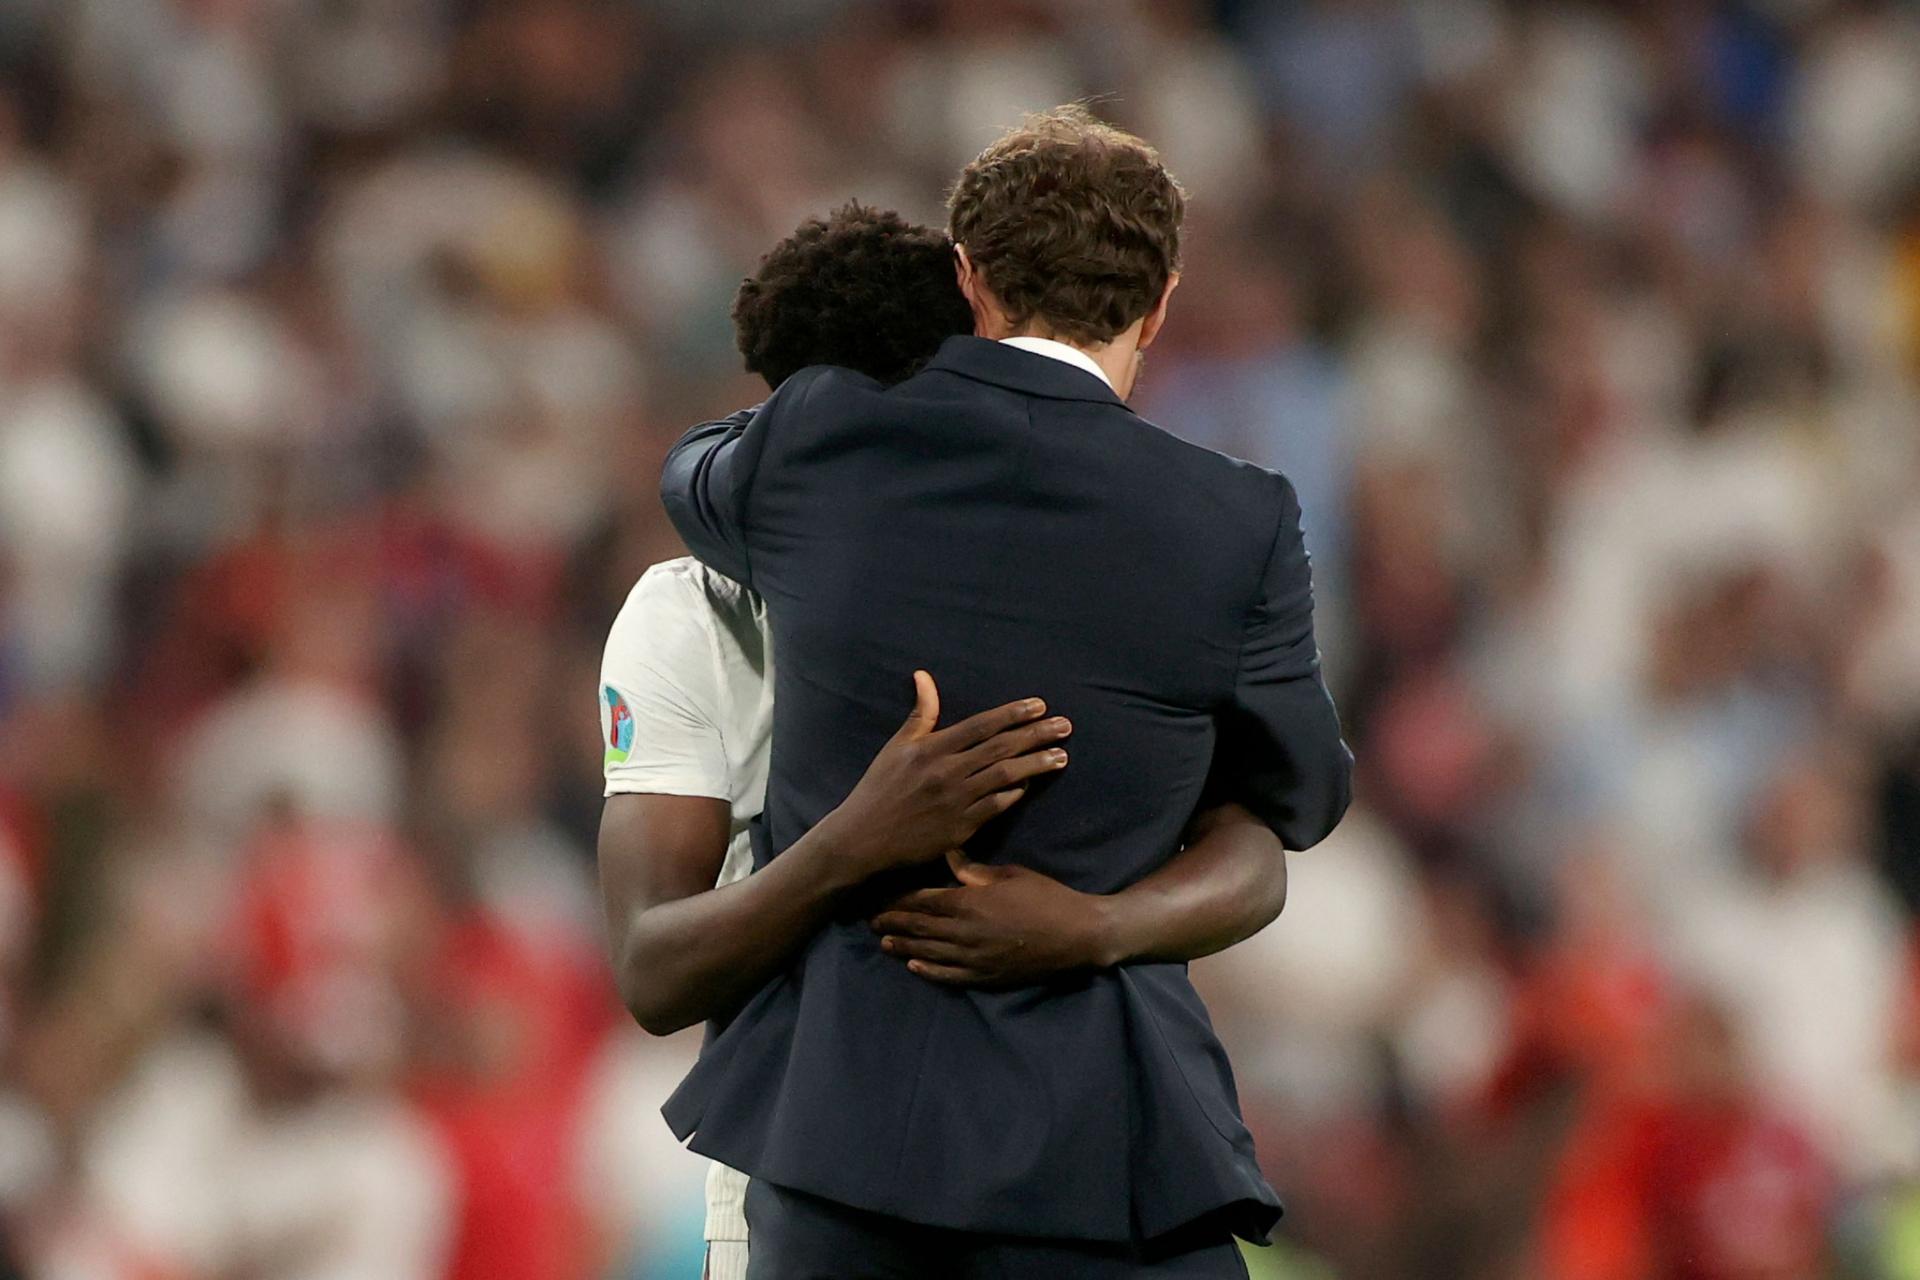 England's manager Gareth Southgate is shown hugging Bukayo Saka on the soccer pitch with fans shown in blurred focus in the distance.